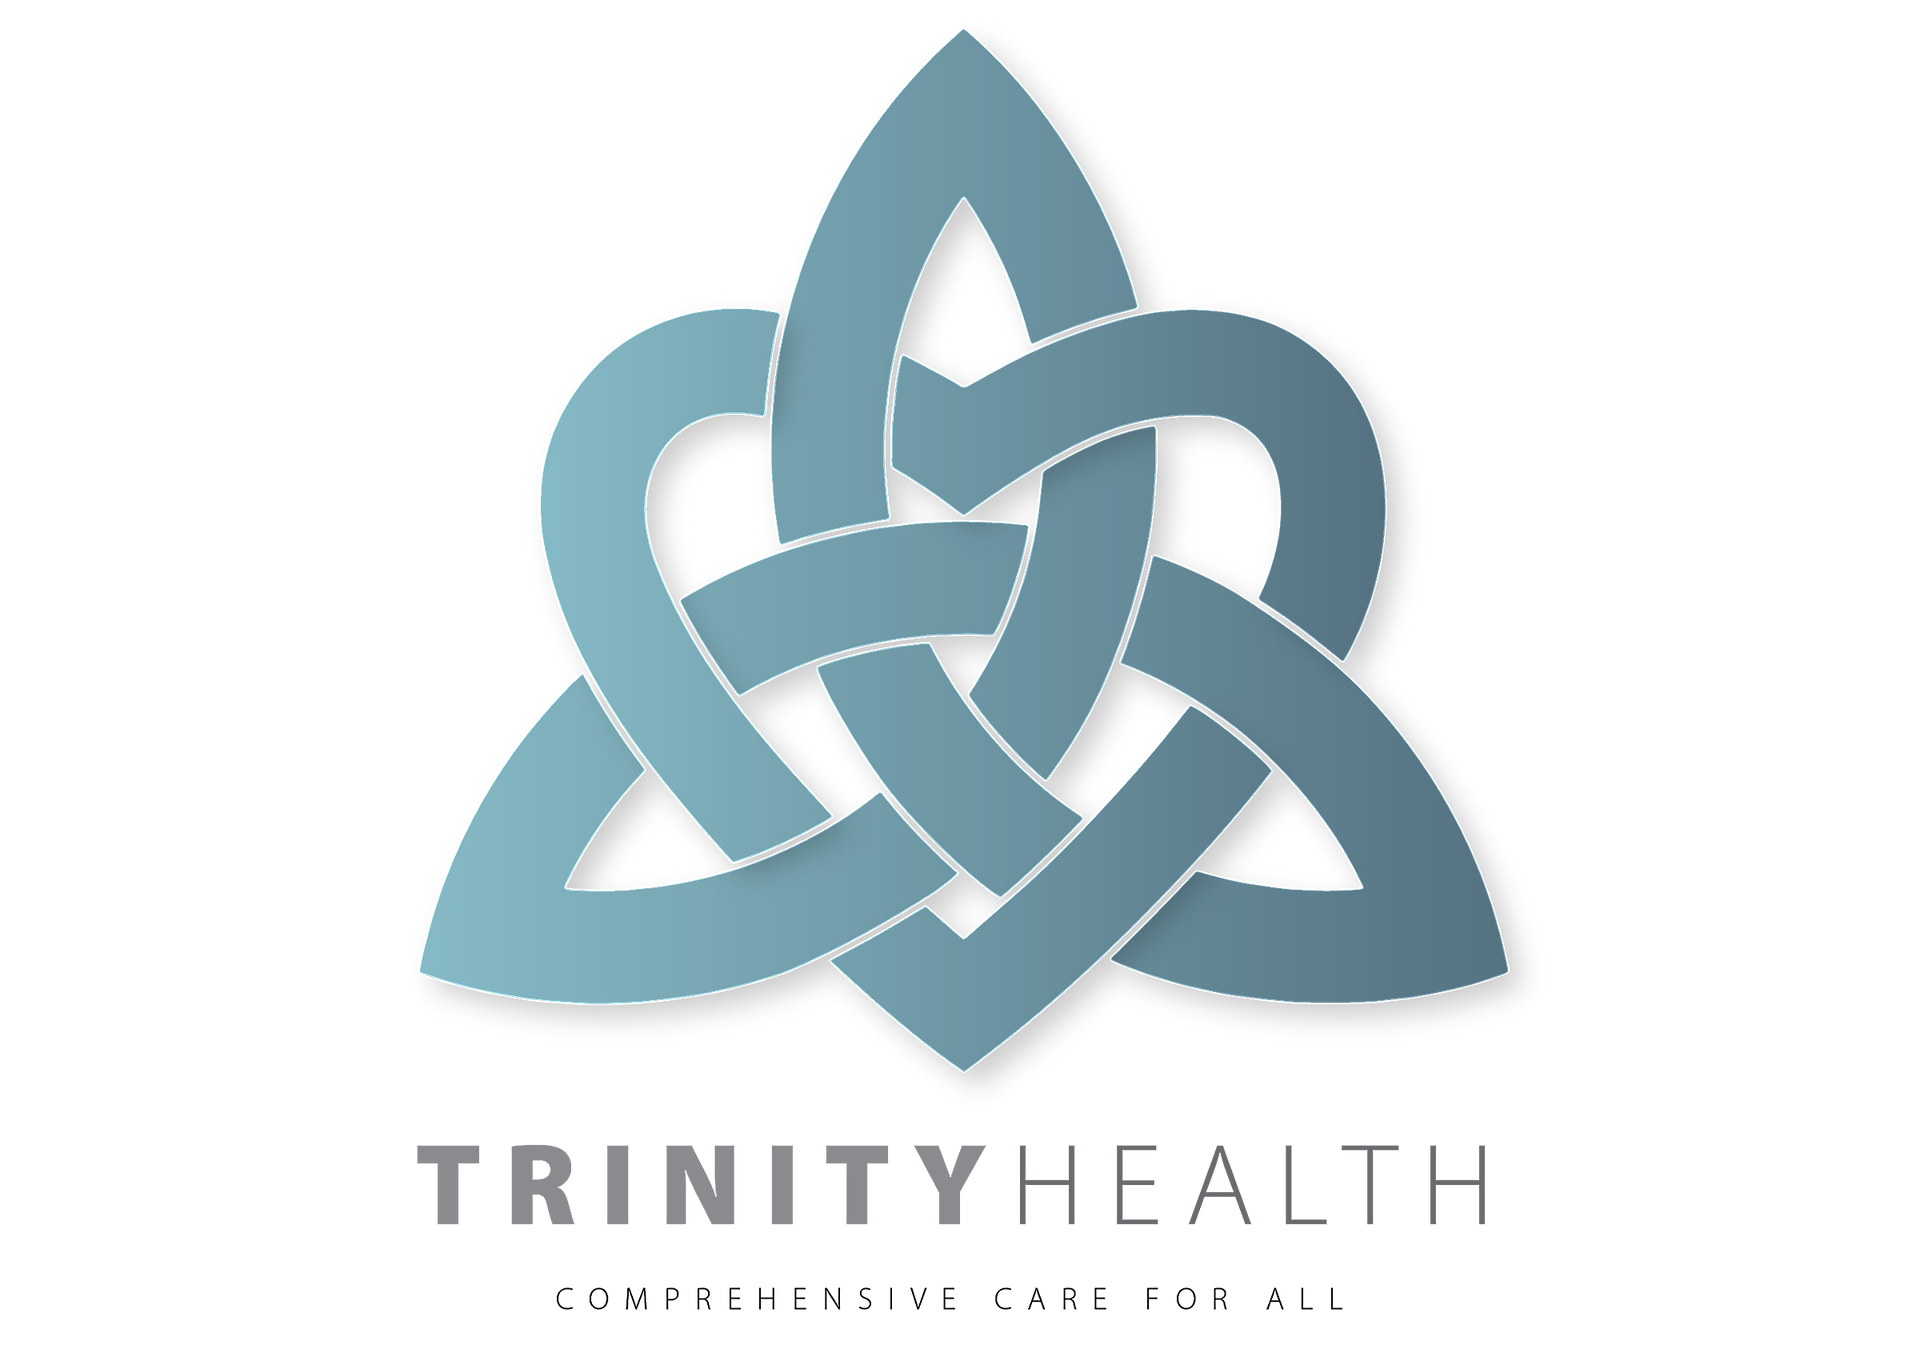 logo for a healthcare network